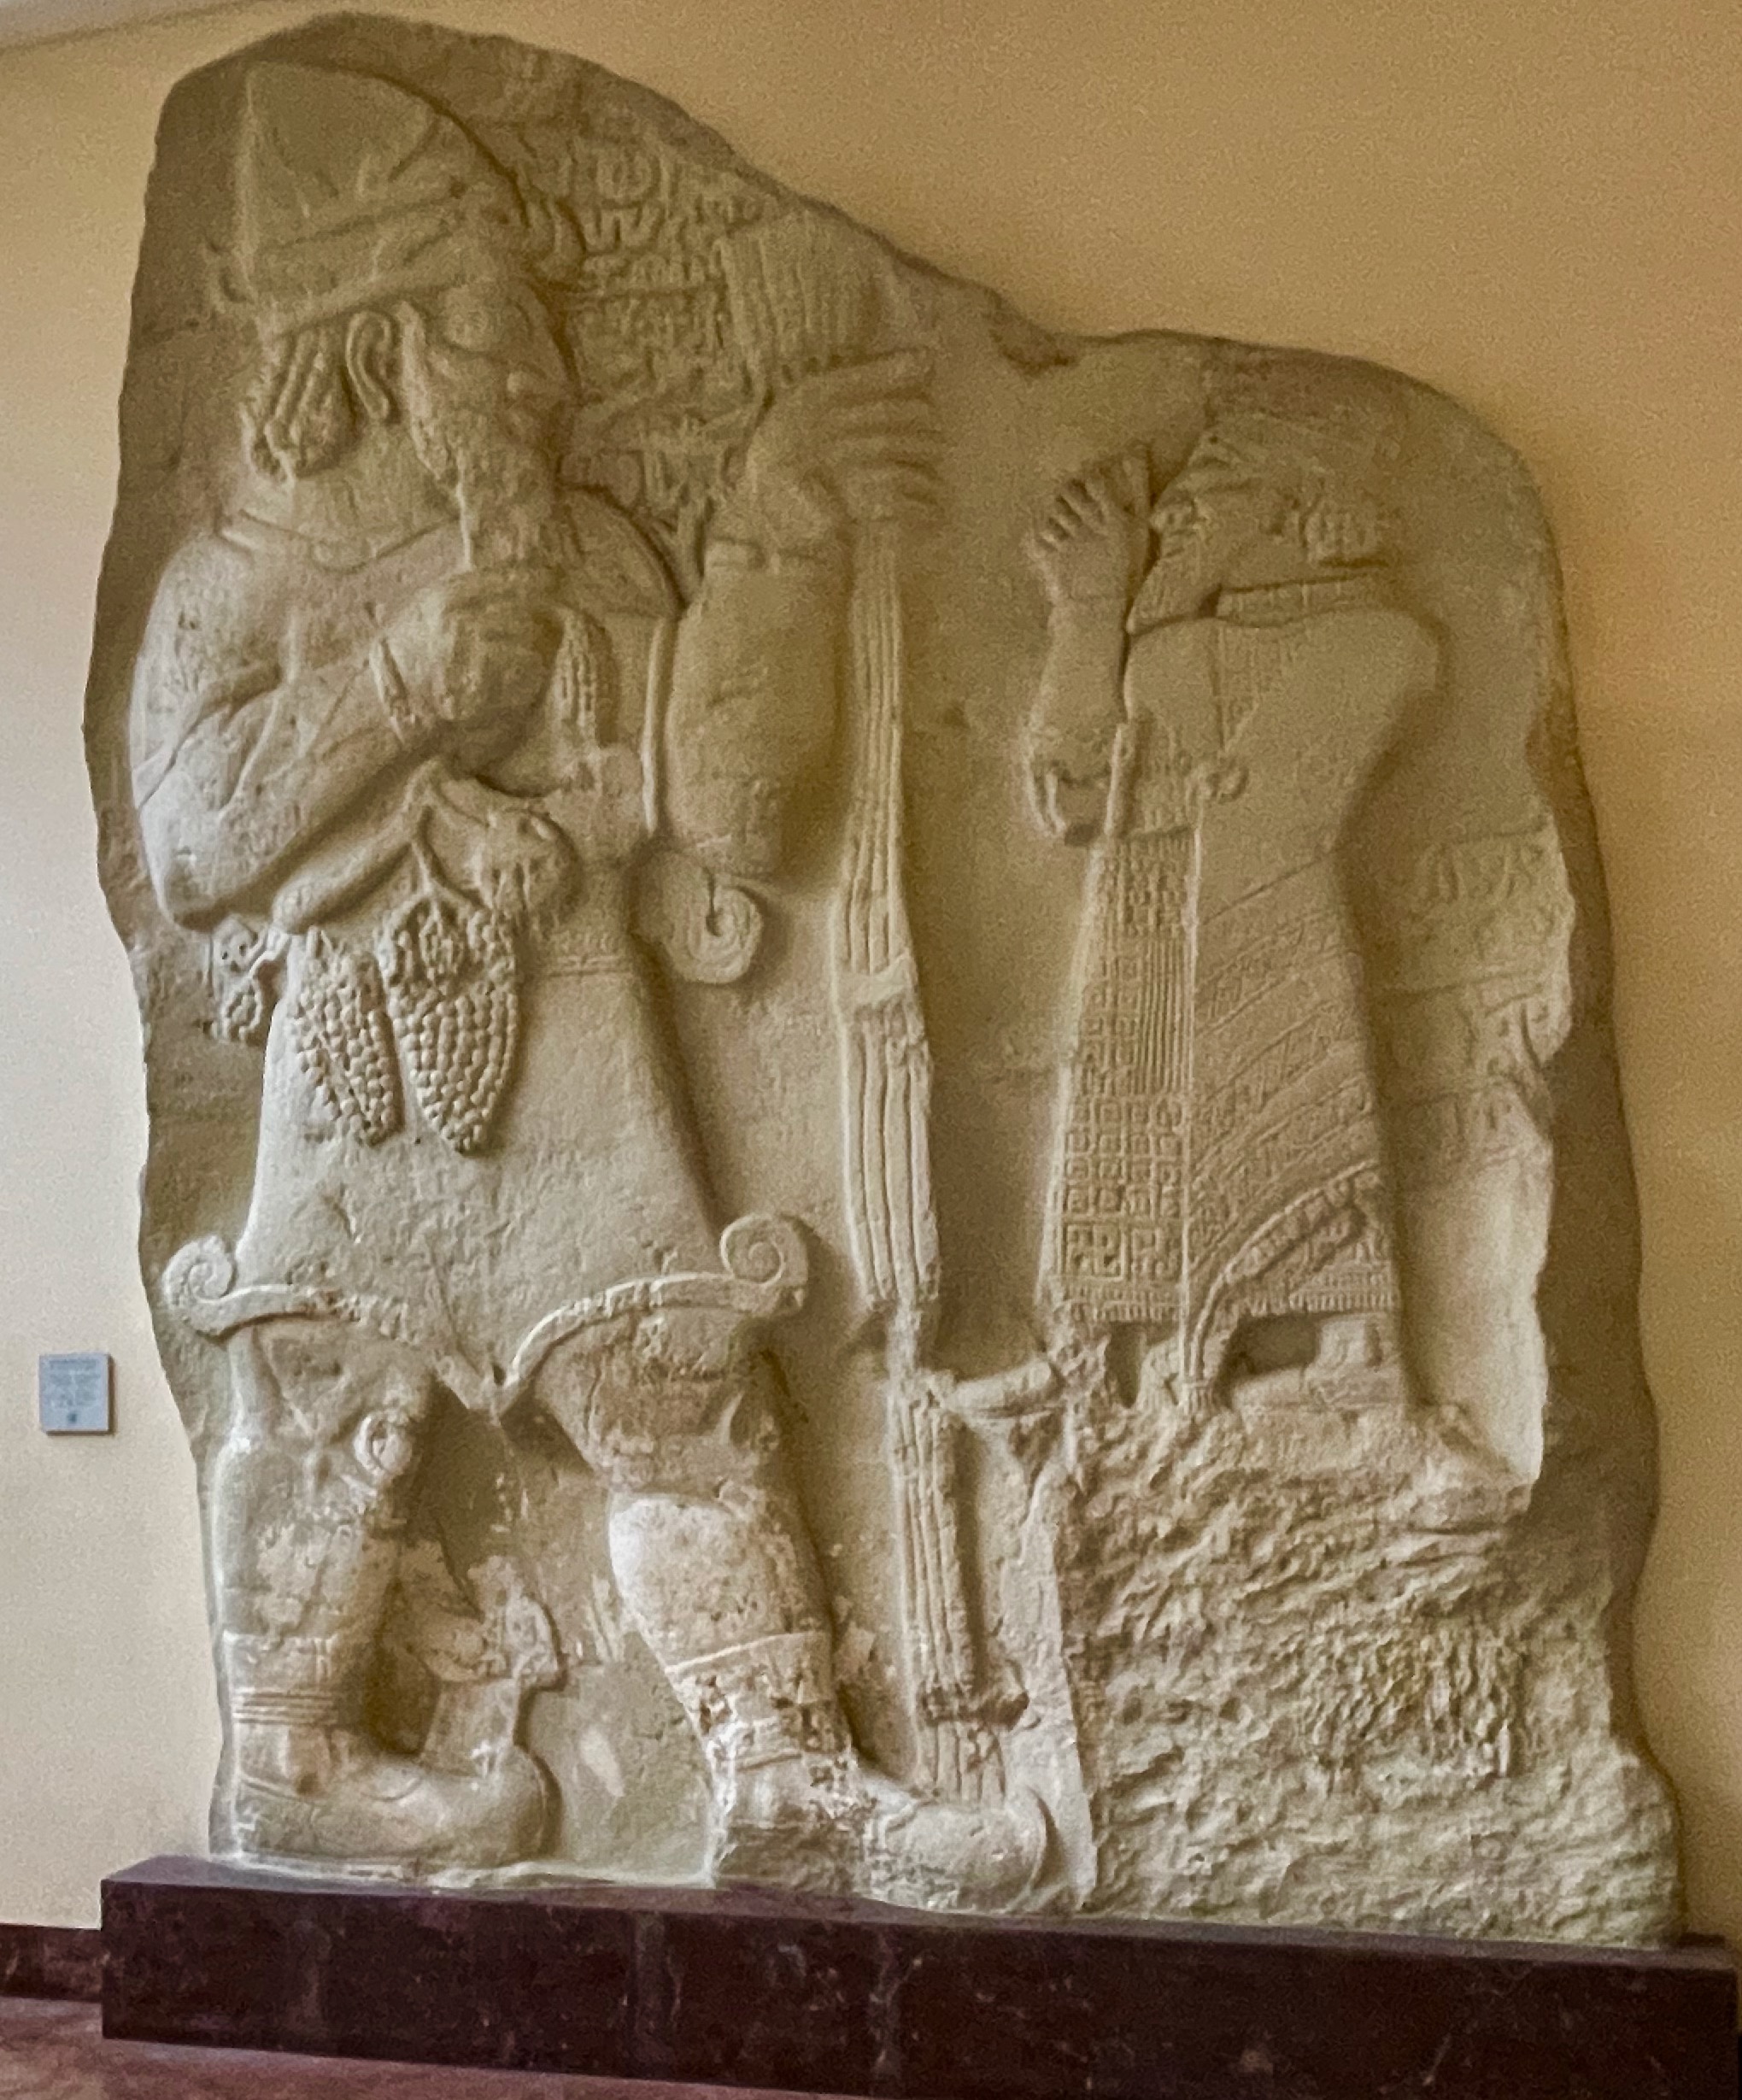 King Warpalawas Praying to the God Tarhunza, Hittite 8th century BC, the Ancient Orient Museum, Istanbul